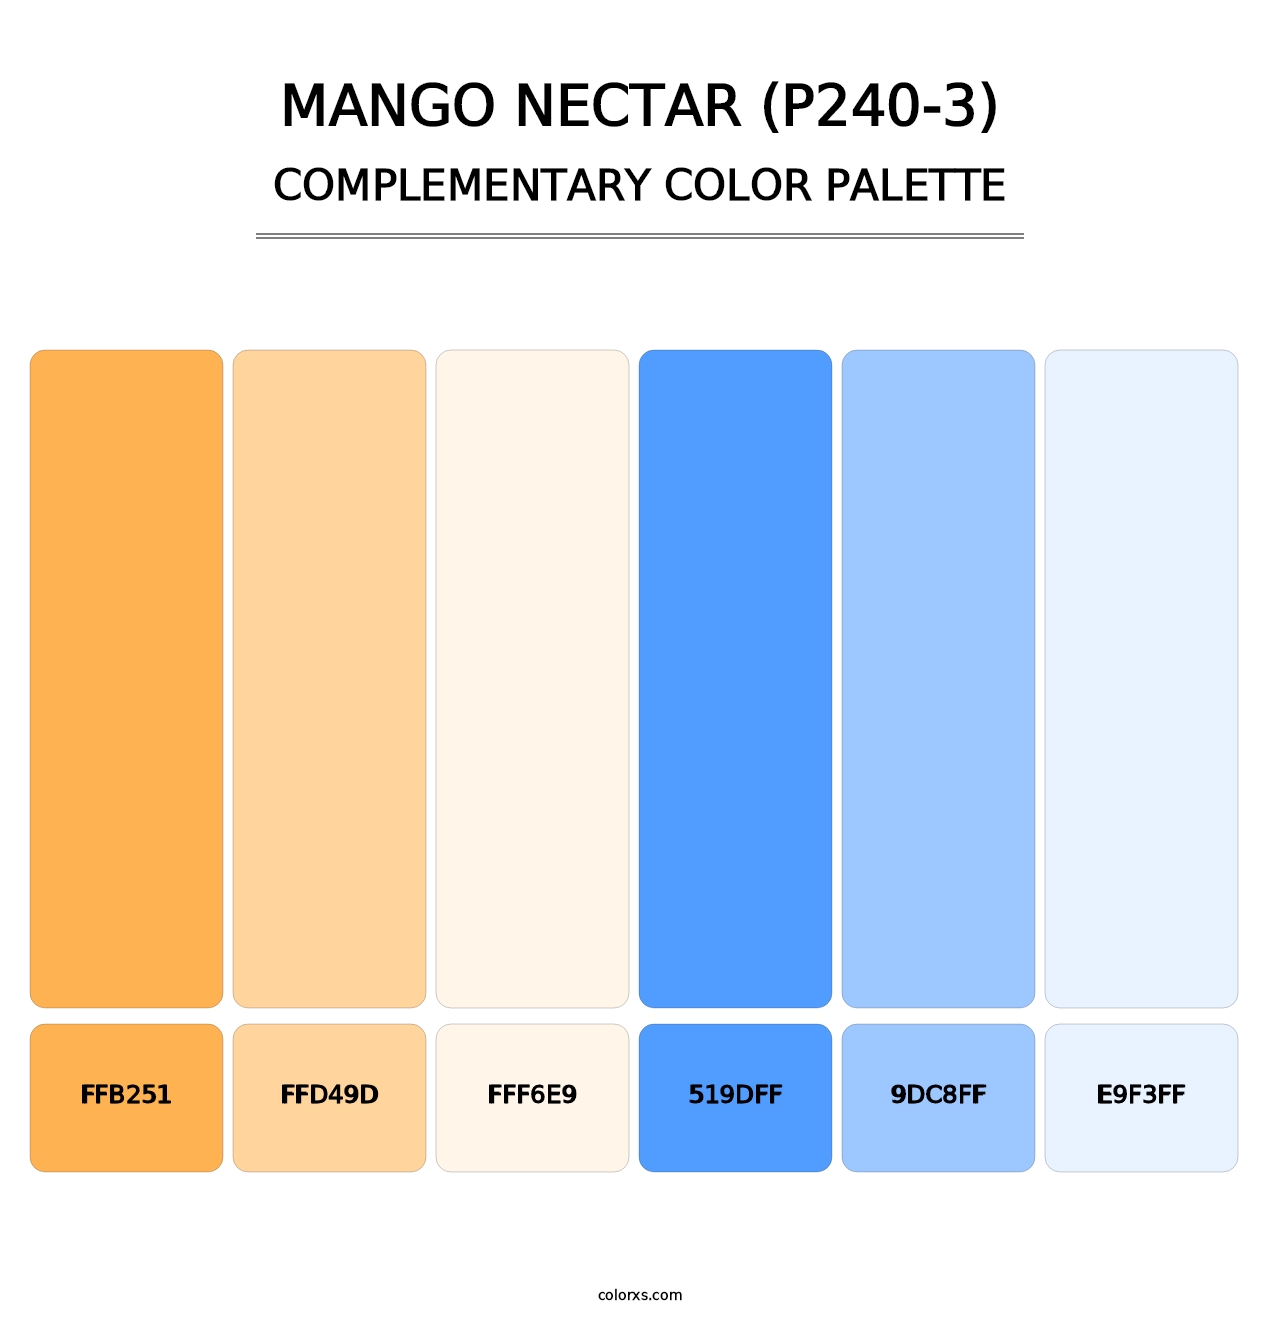 Mango Nectar (P240-3) - Complementary Color Palette